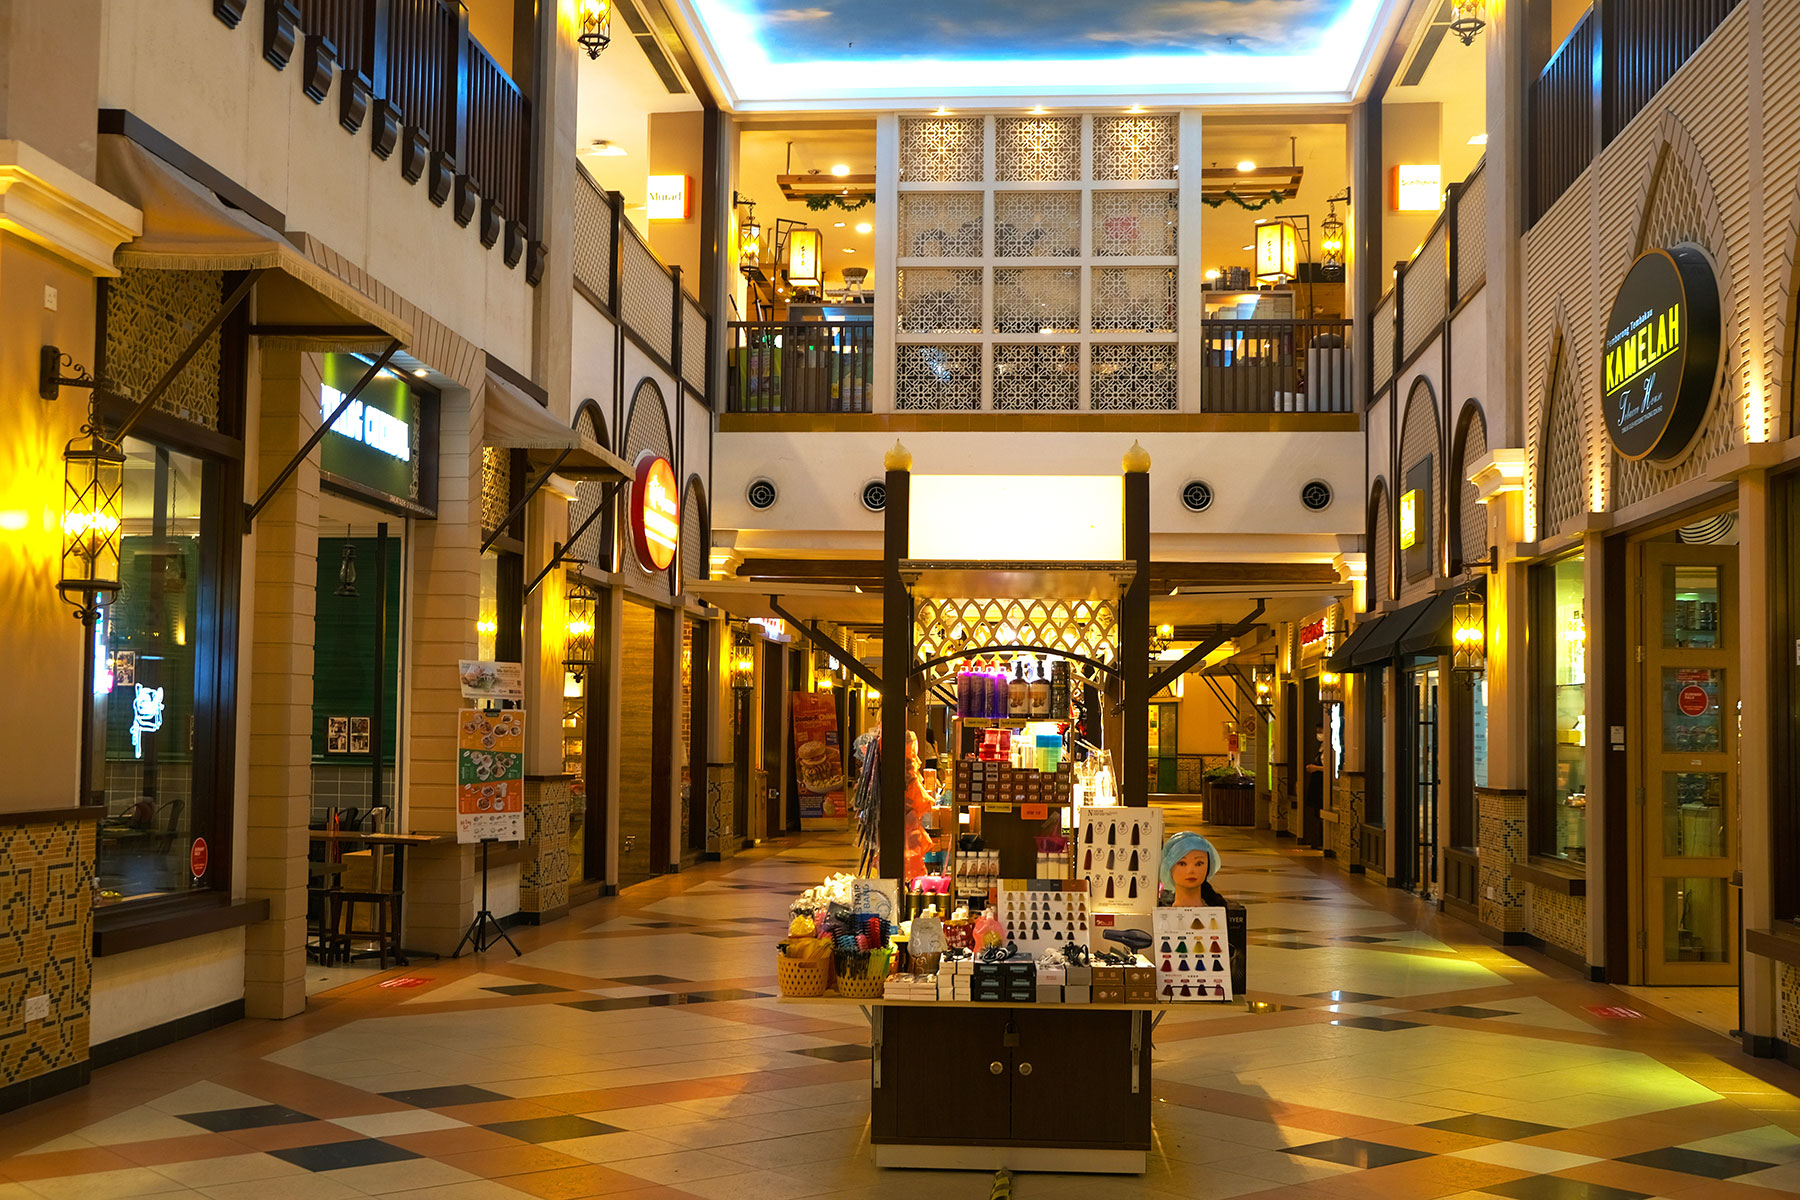 Explore the colourful booths and indulge in the exotic knick knacks of Morocco.